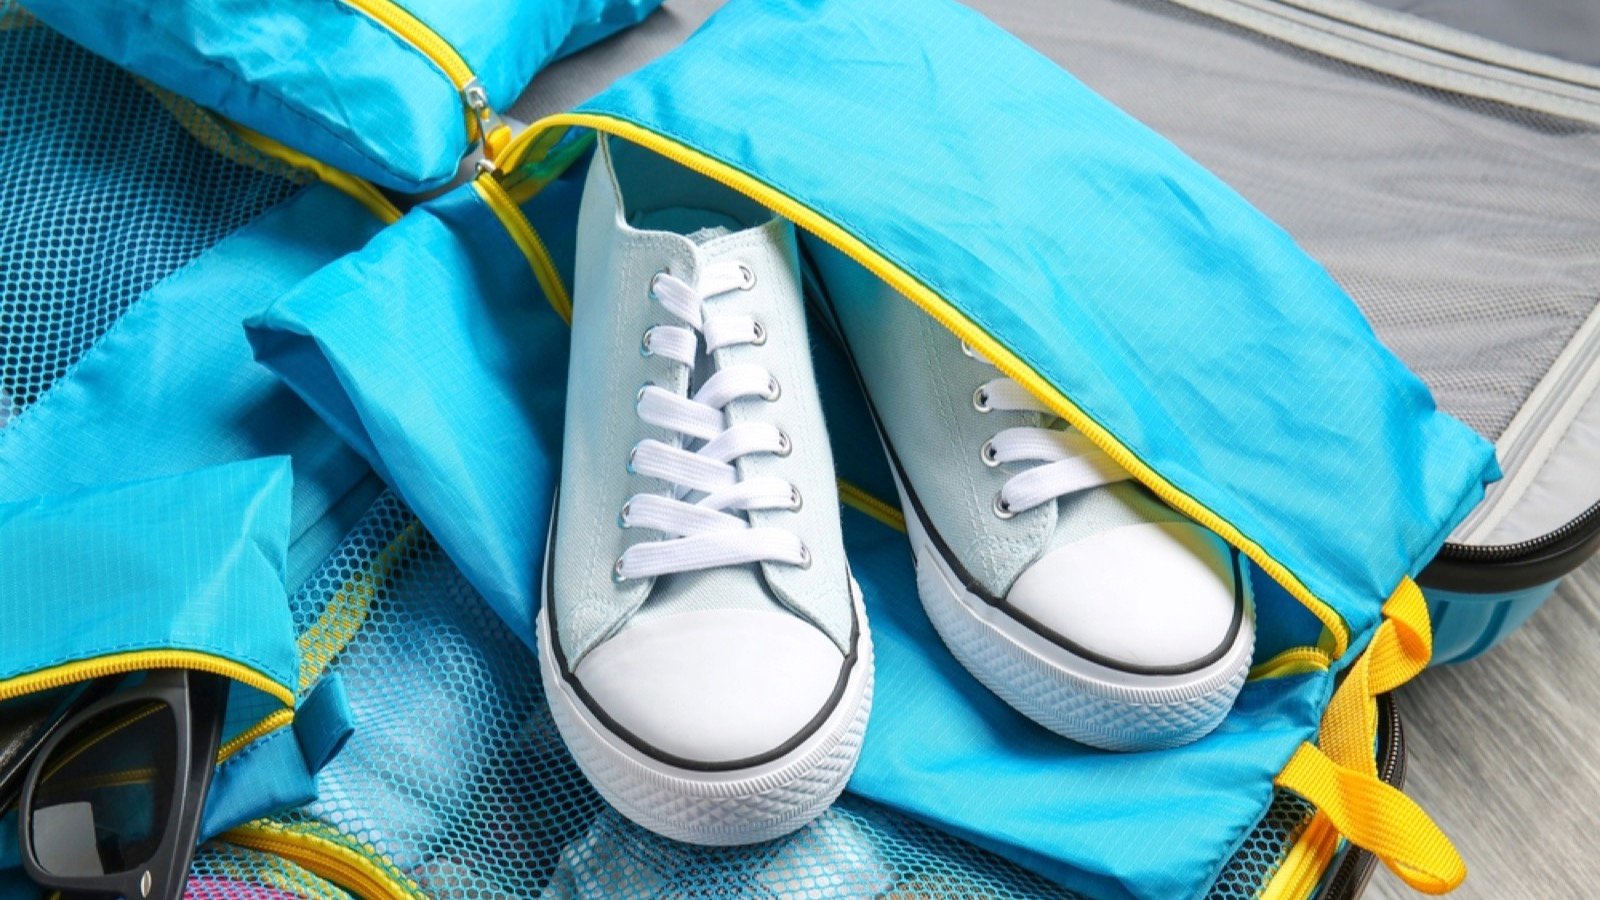 <p>If you travel with a separate bag or case for your shoes, you can also store your unclean laundry there. Place the laundry that needs washing in a small plastic or cloth bag, seal it, and put the bag in with your shoes. This step ensures your soiled laundry won’t mix in with your clean clothes, and by keeping them with your shoes, you’ll remember that they need to be washed.</p>